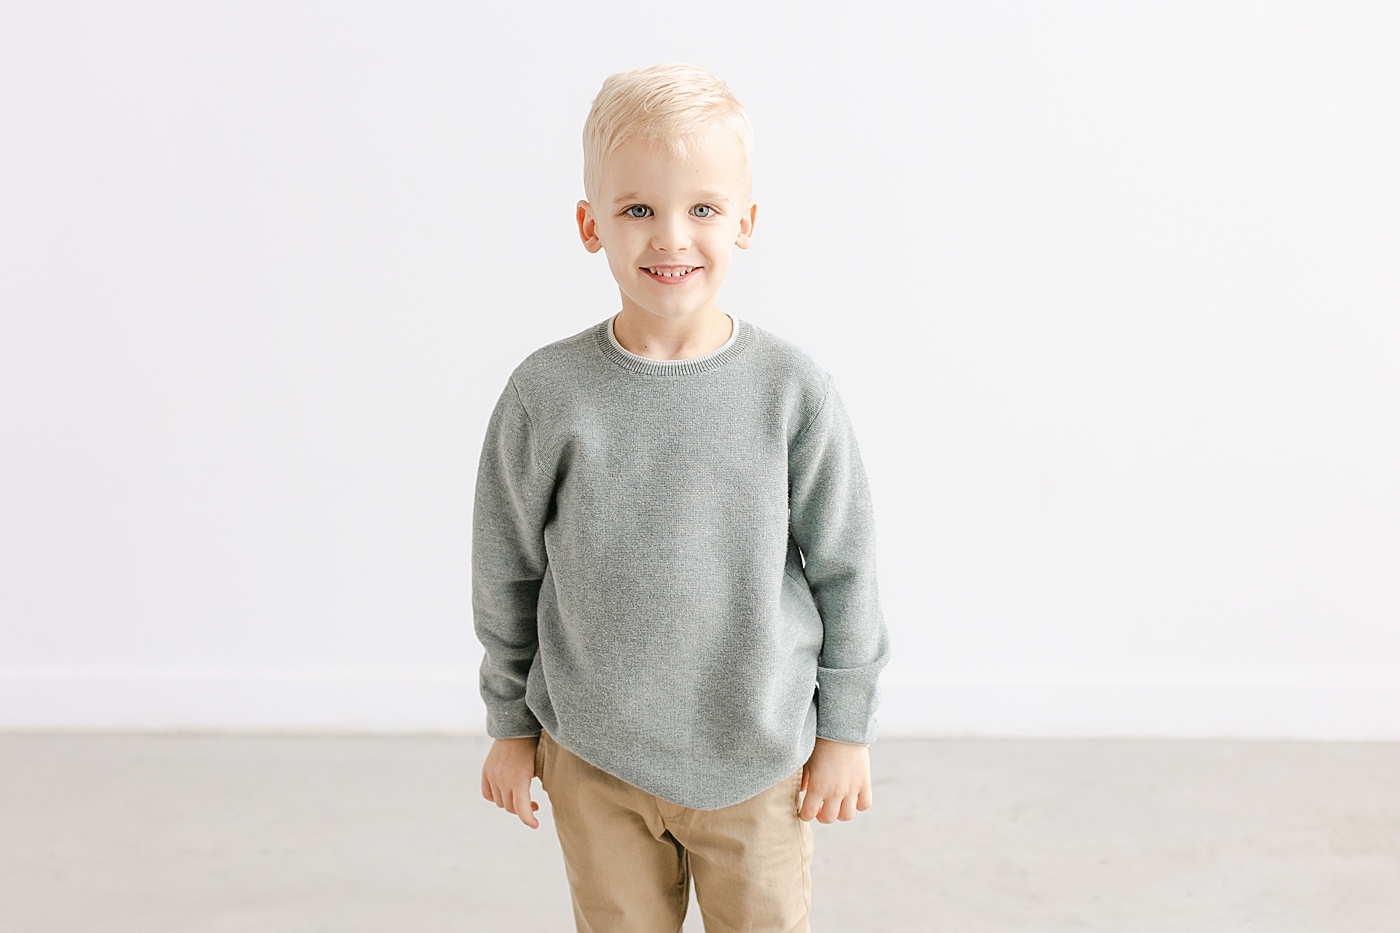 Little blonde boy in gray shirt smiling | Photo by Sana Ahmed Photography